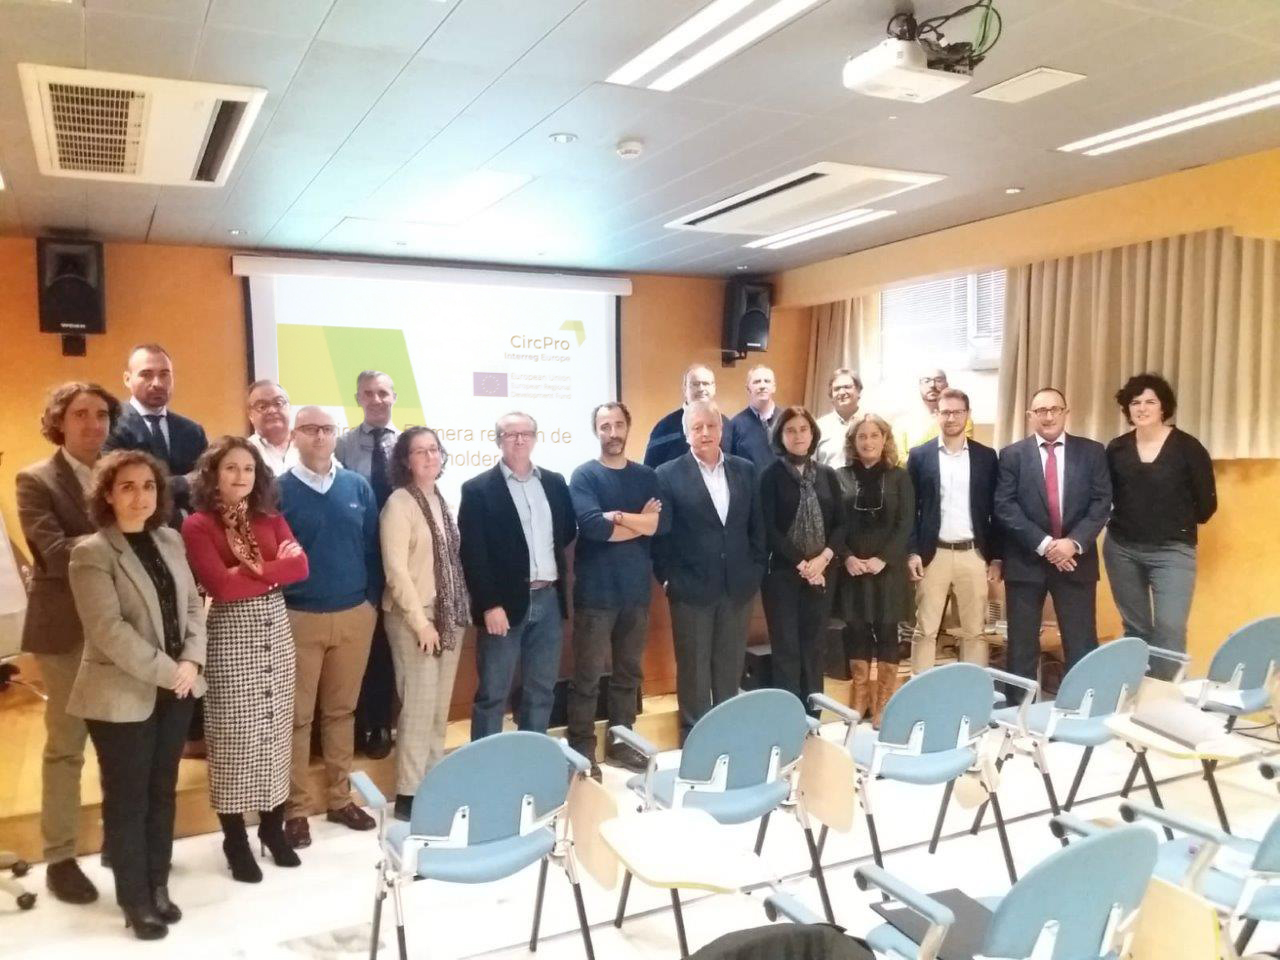 1st CircPro Stakeholders meeting in Seville